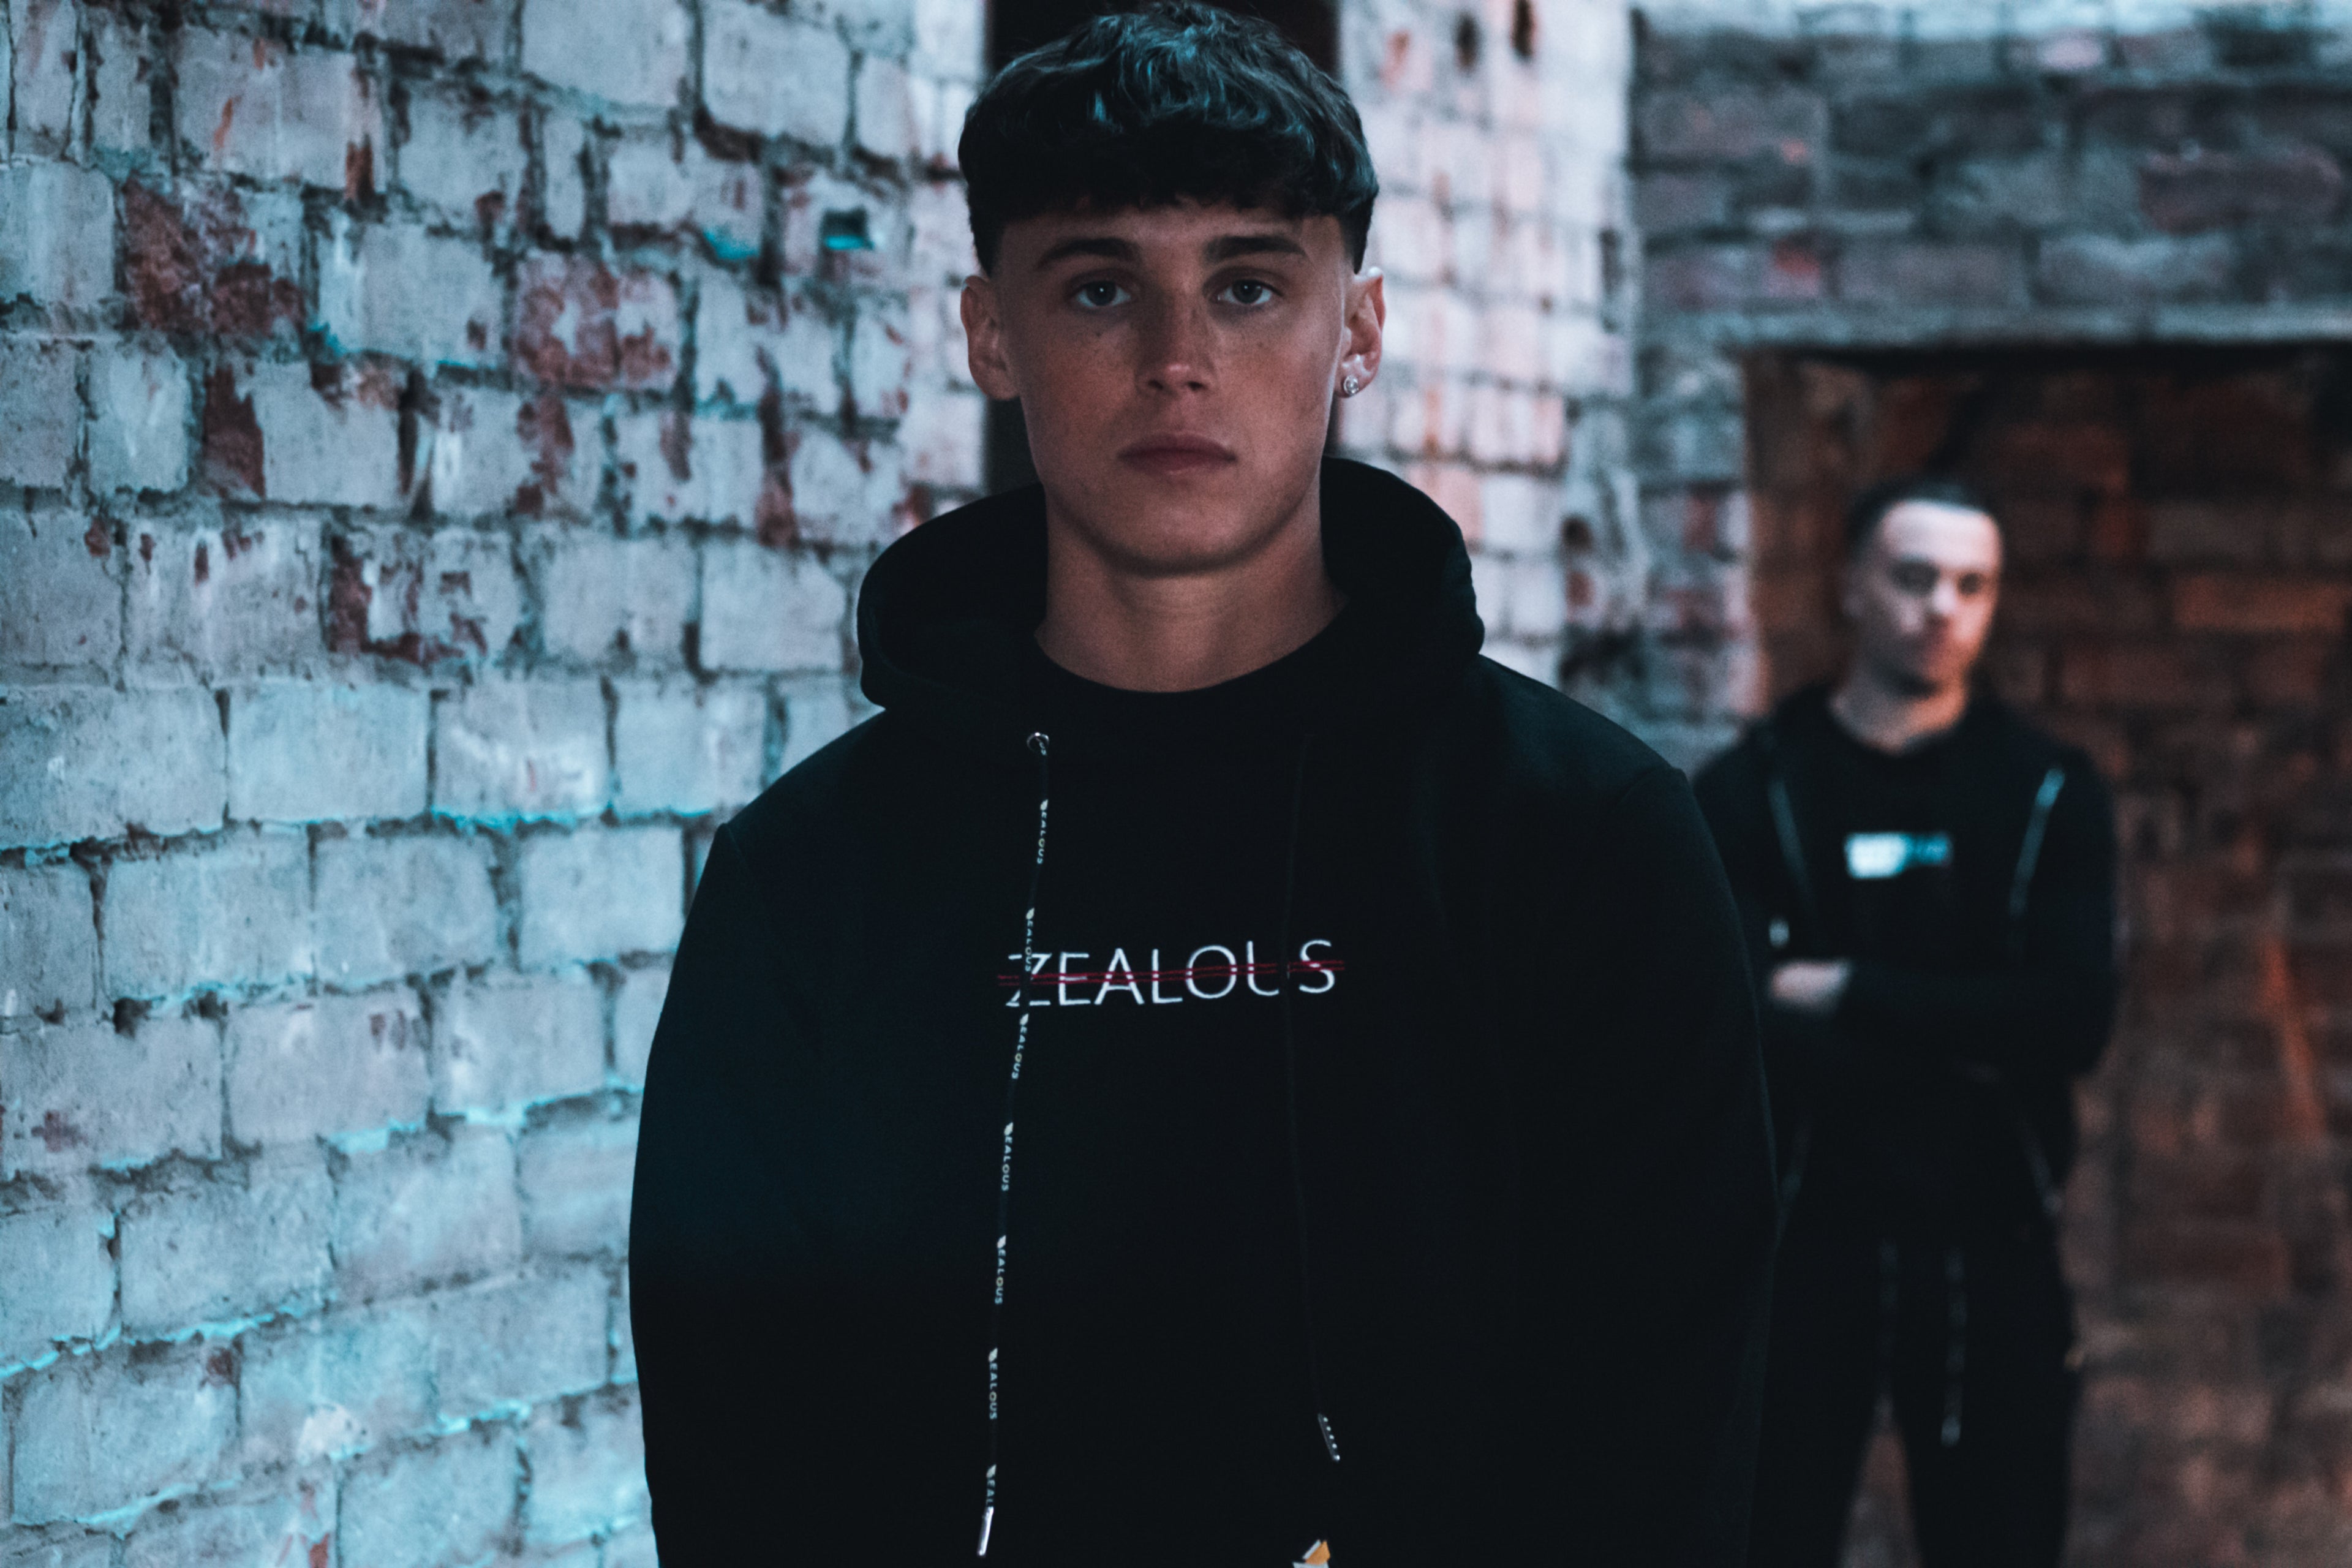 We are Zealous Rebellious Clothing, an independent clothing brand base